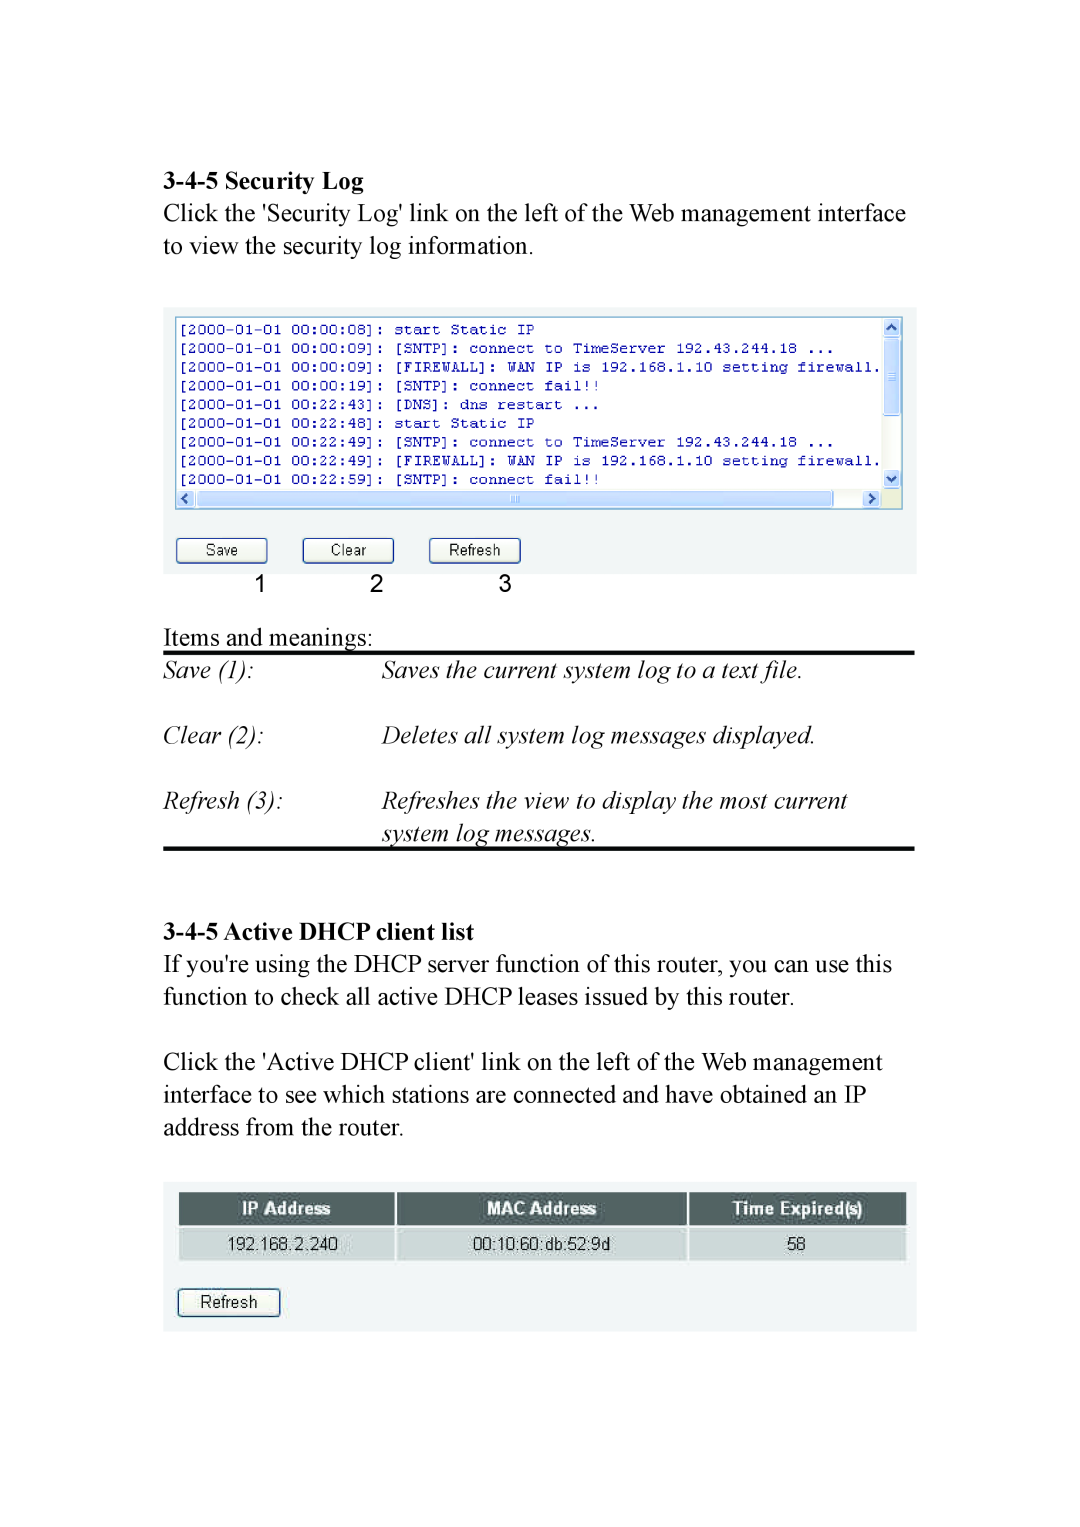 Intellinet Network Solutions INT-524315-UM-0808-1 user manual Security Log, Active DHCP client list 